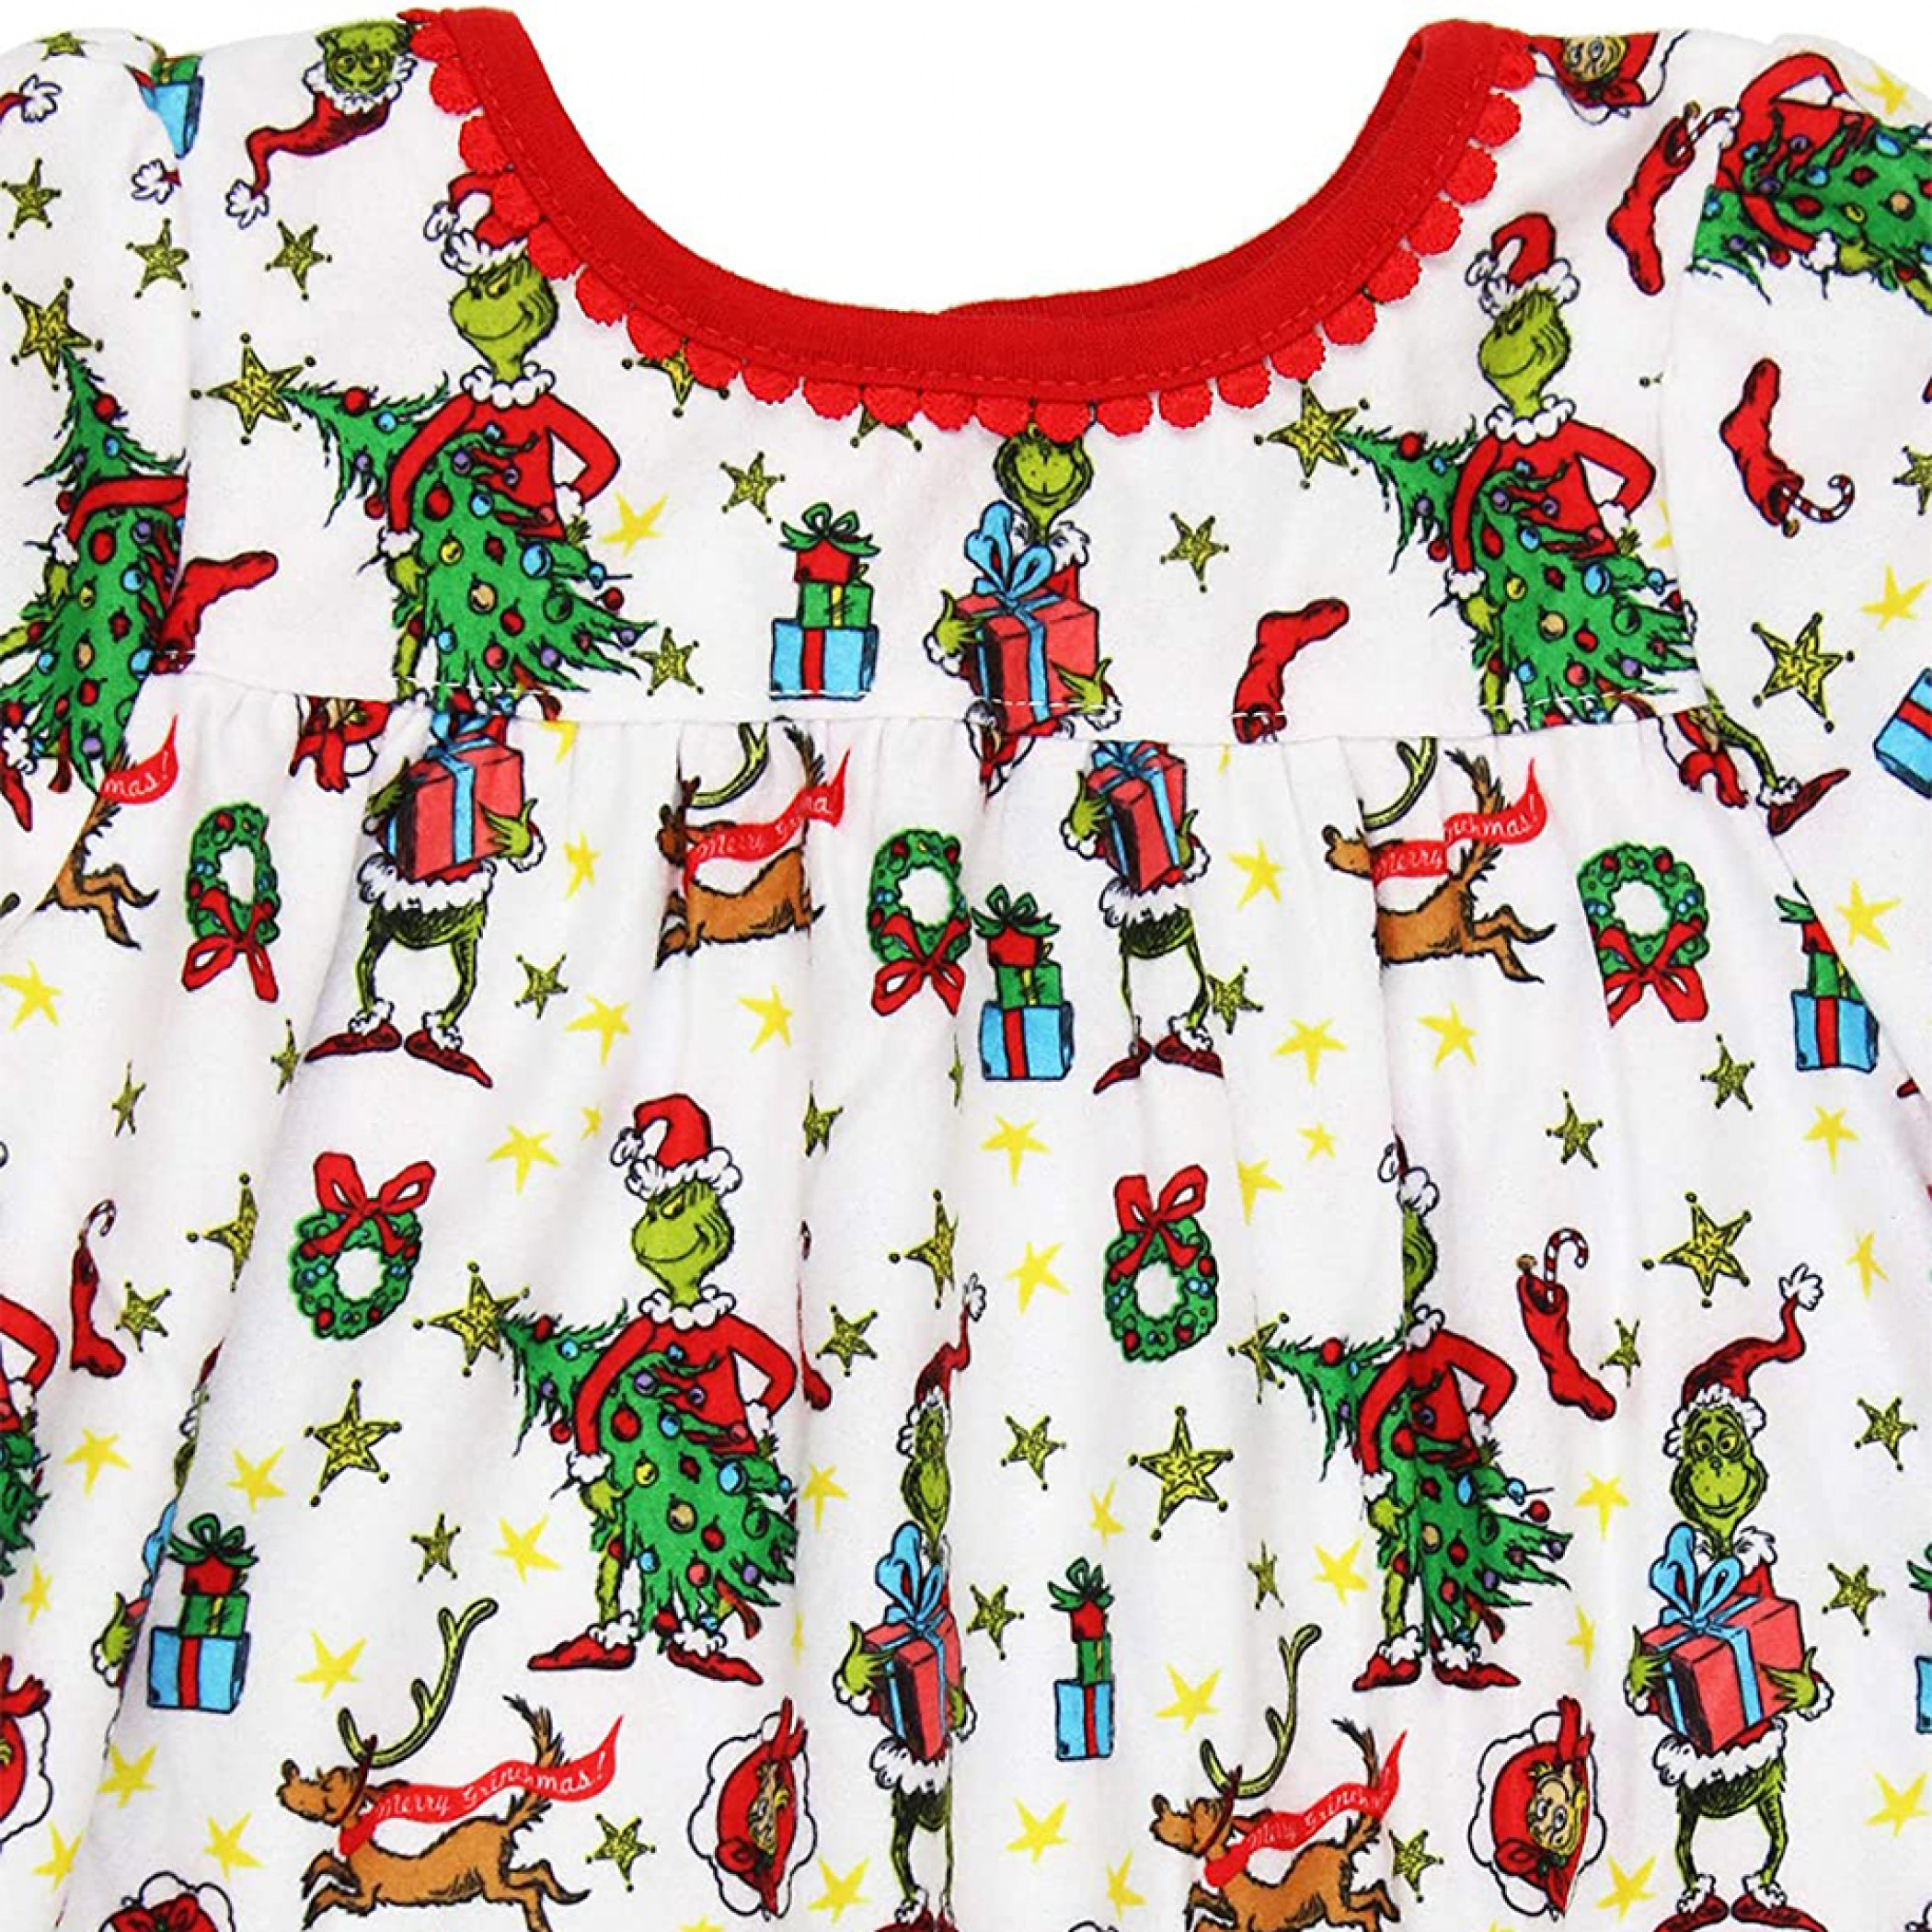 Dr. Suess The Grinch All Over Print Toddler Girls Nightgown